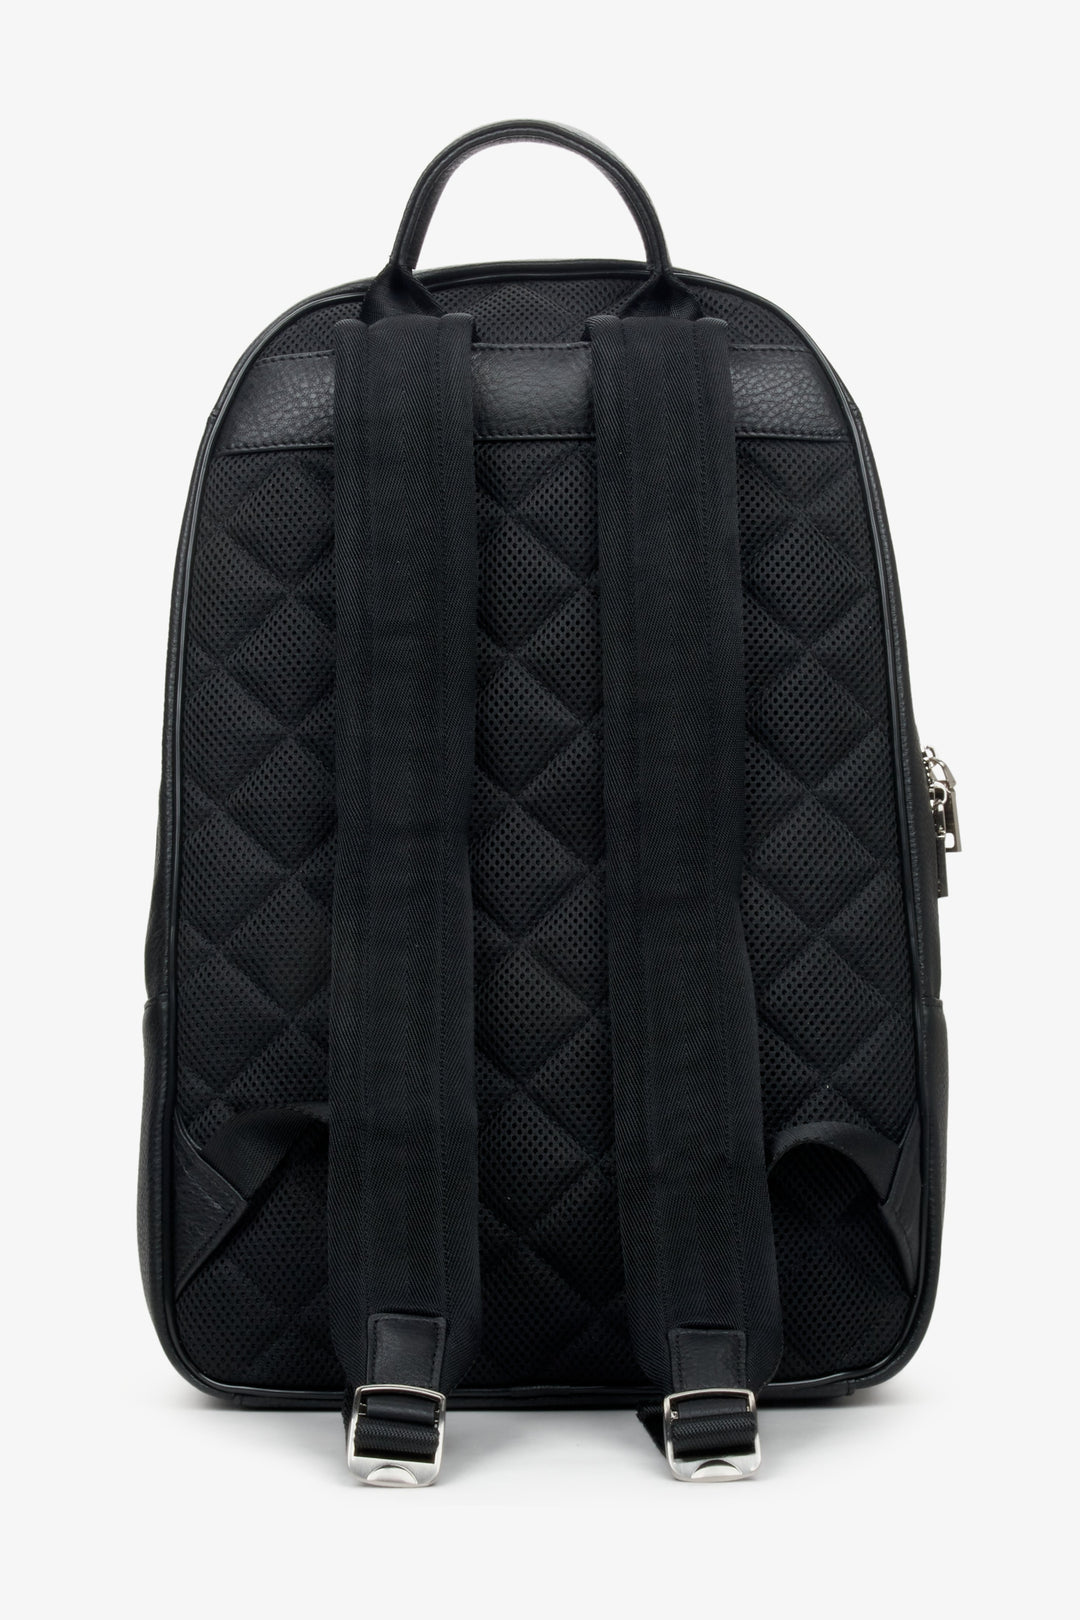 Men's spacious black backpack made of genuine leather by Estro - close-up on the back view.